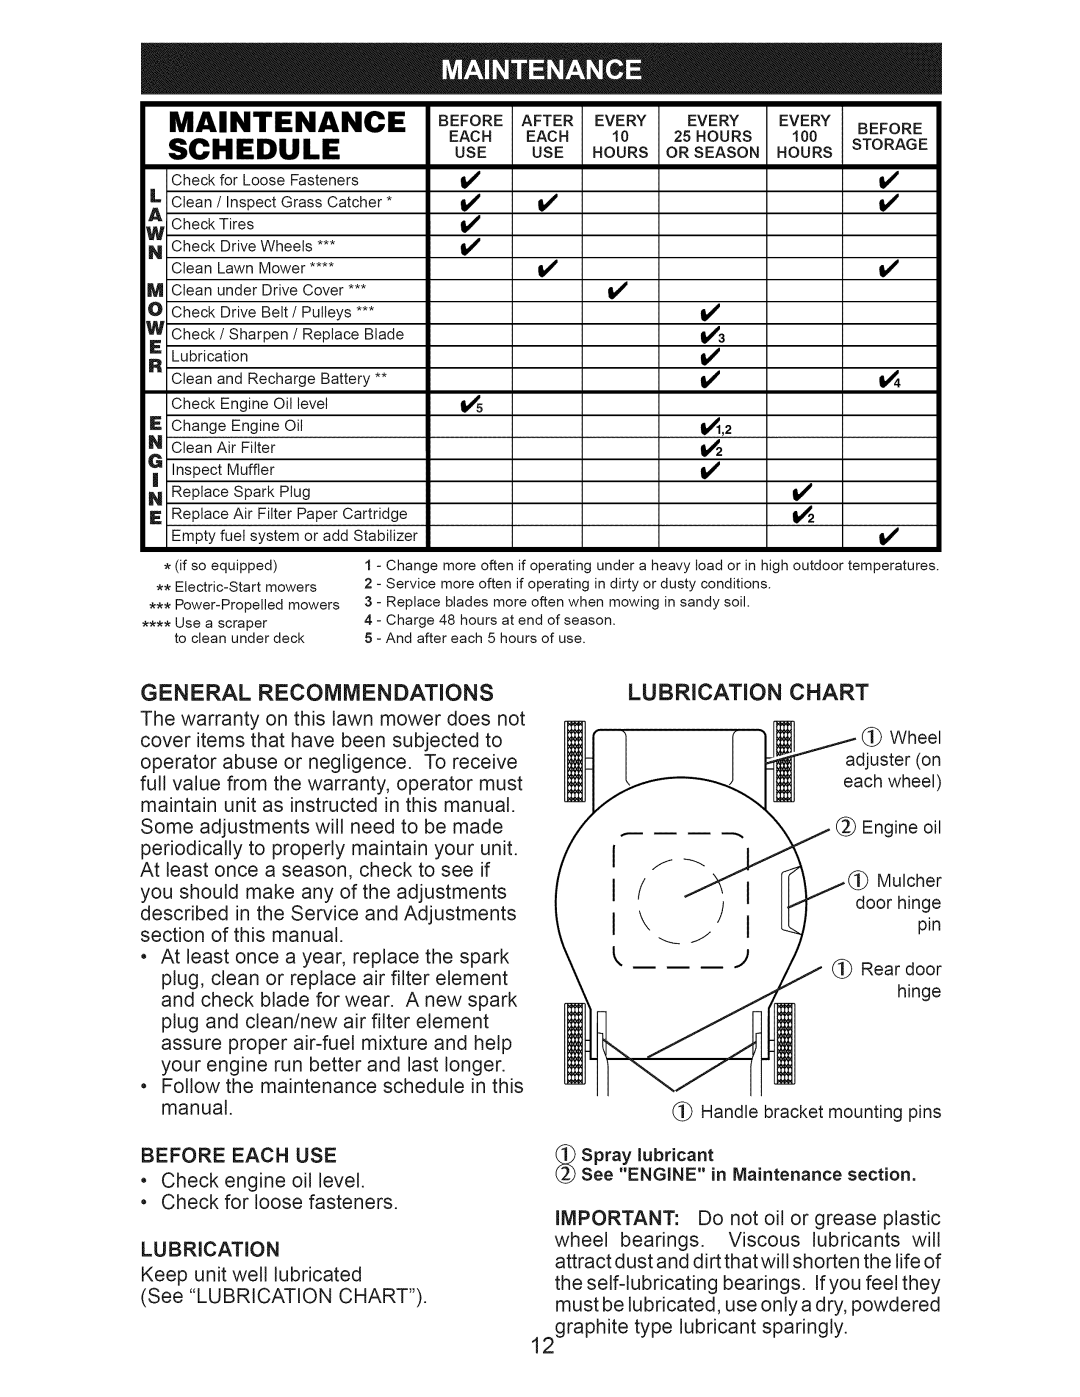 Craftsman 917.376391 owner manual Maintenance, Schedule, Use Hours 